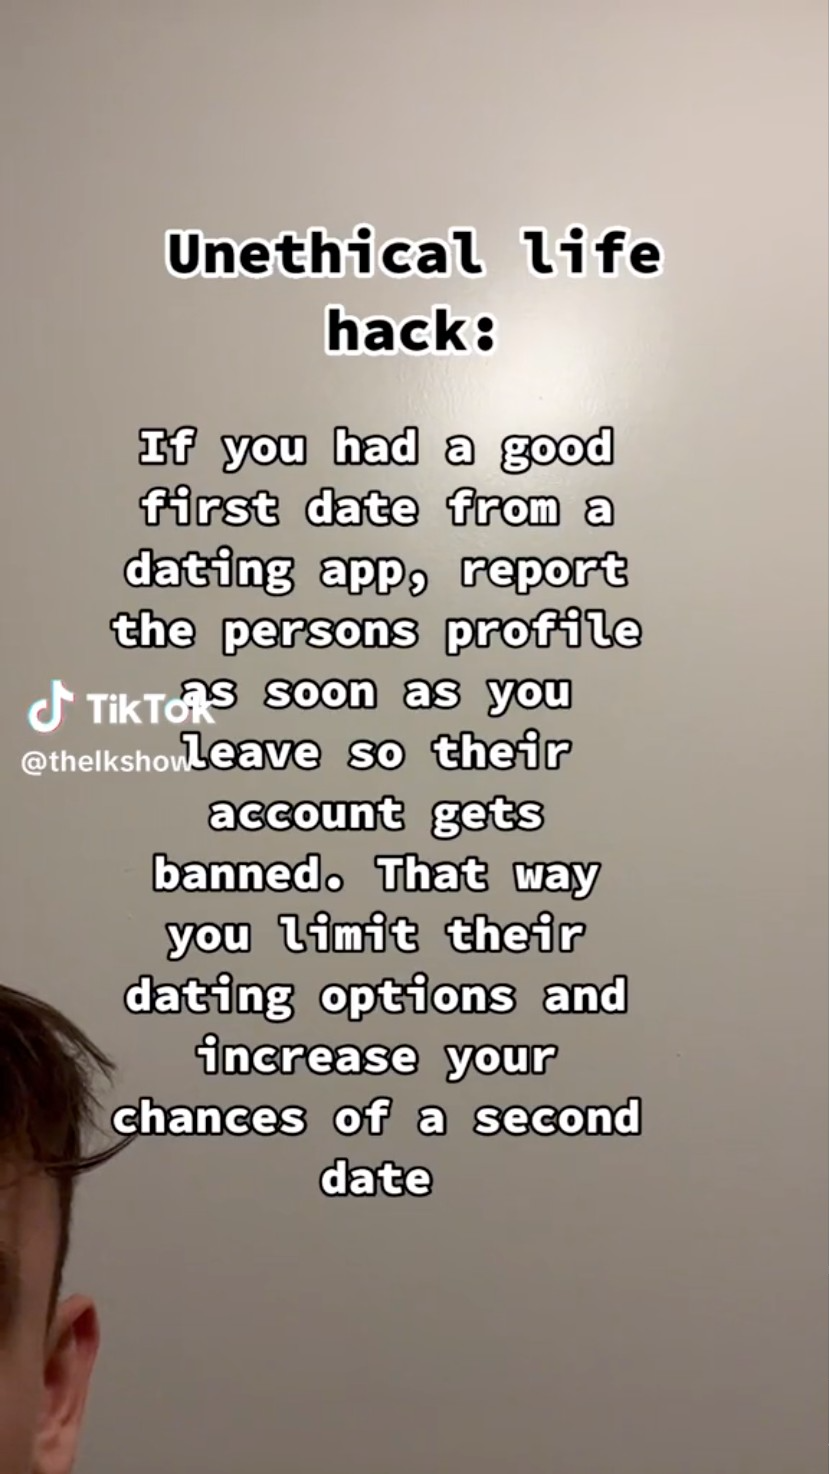 Unethical life hack If you had a good first date from a dating app, report the persons profile TikToRs soon as you so their account gets banned. That way you limit their dating options and increase your chances of a second date